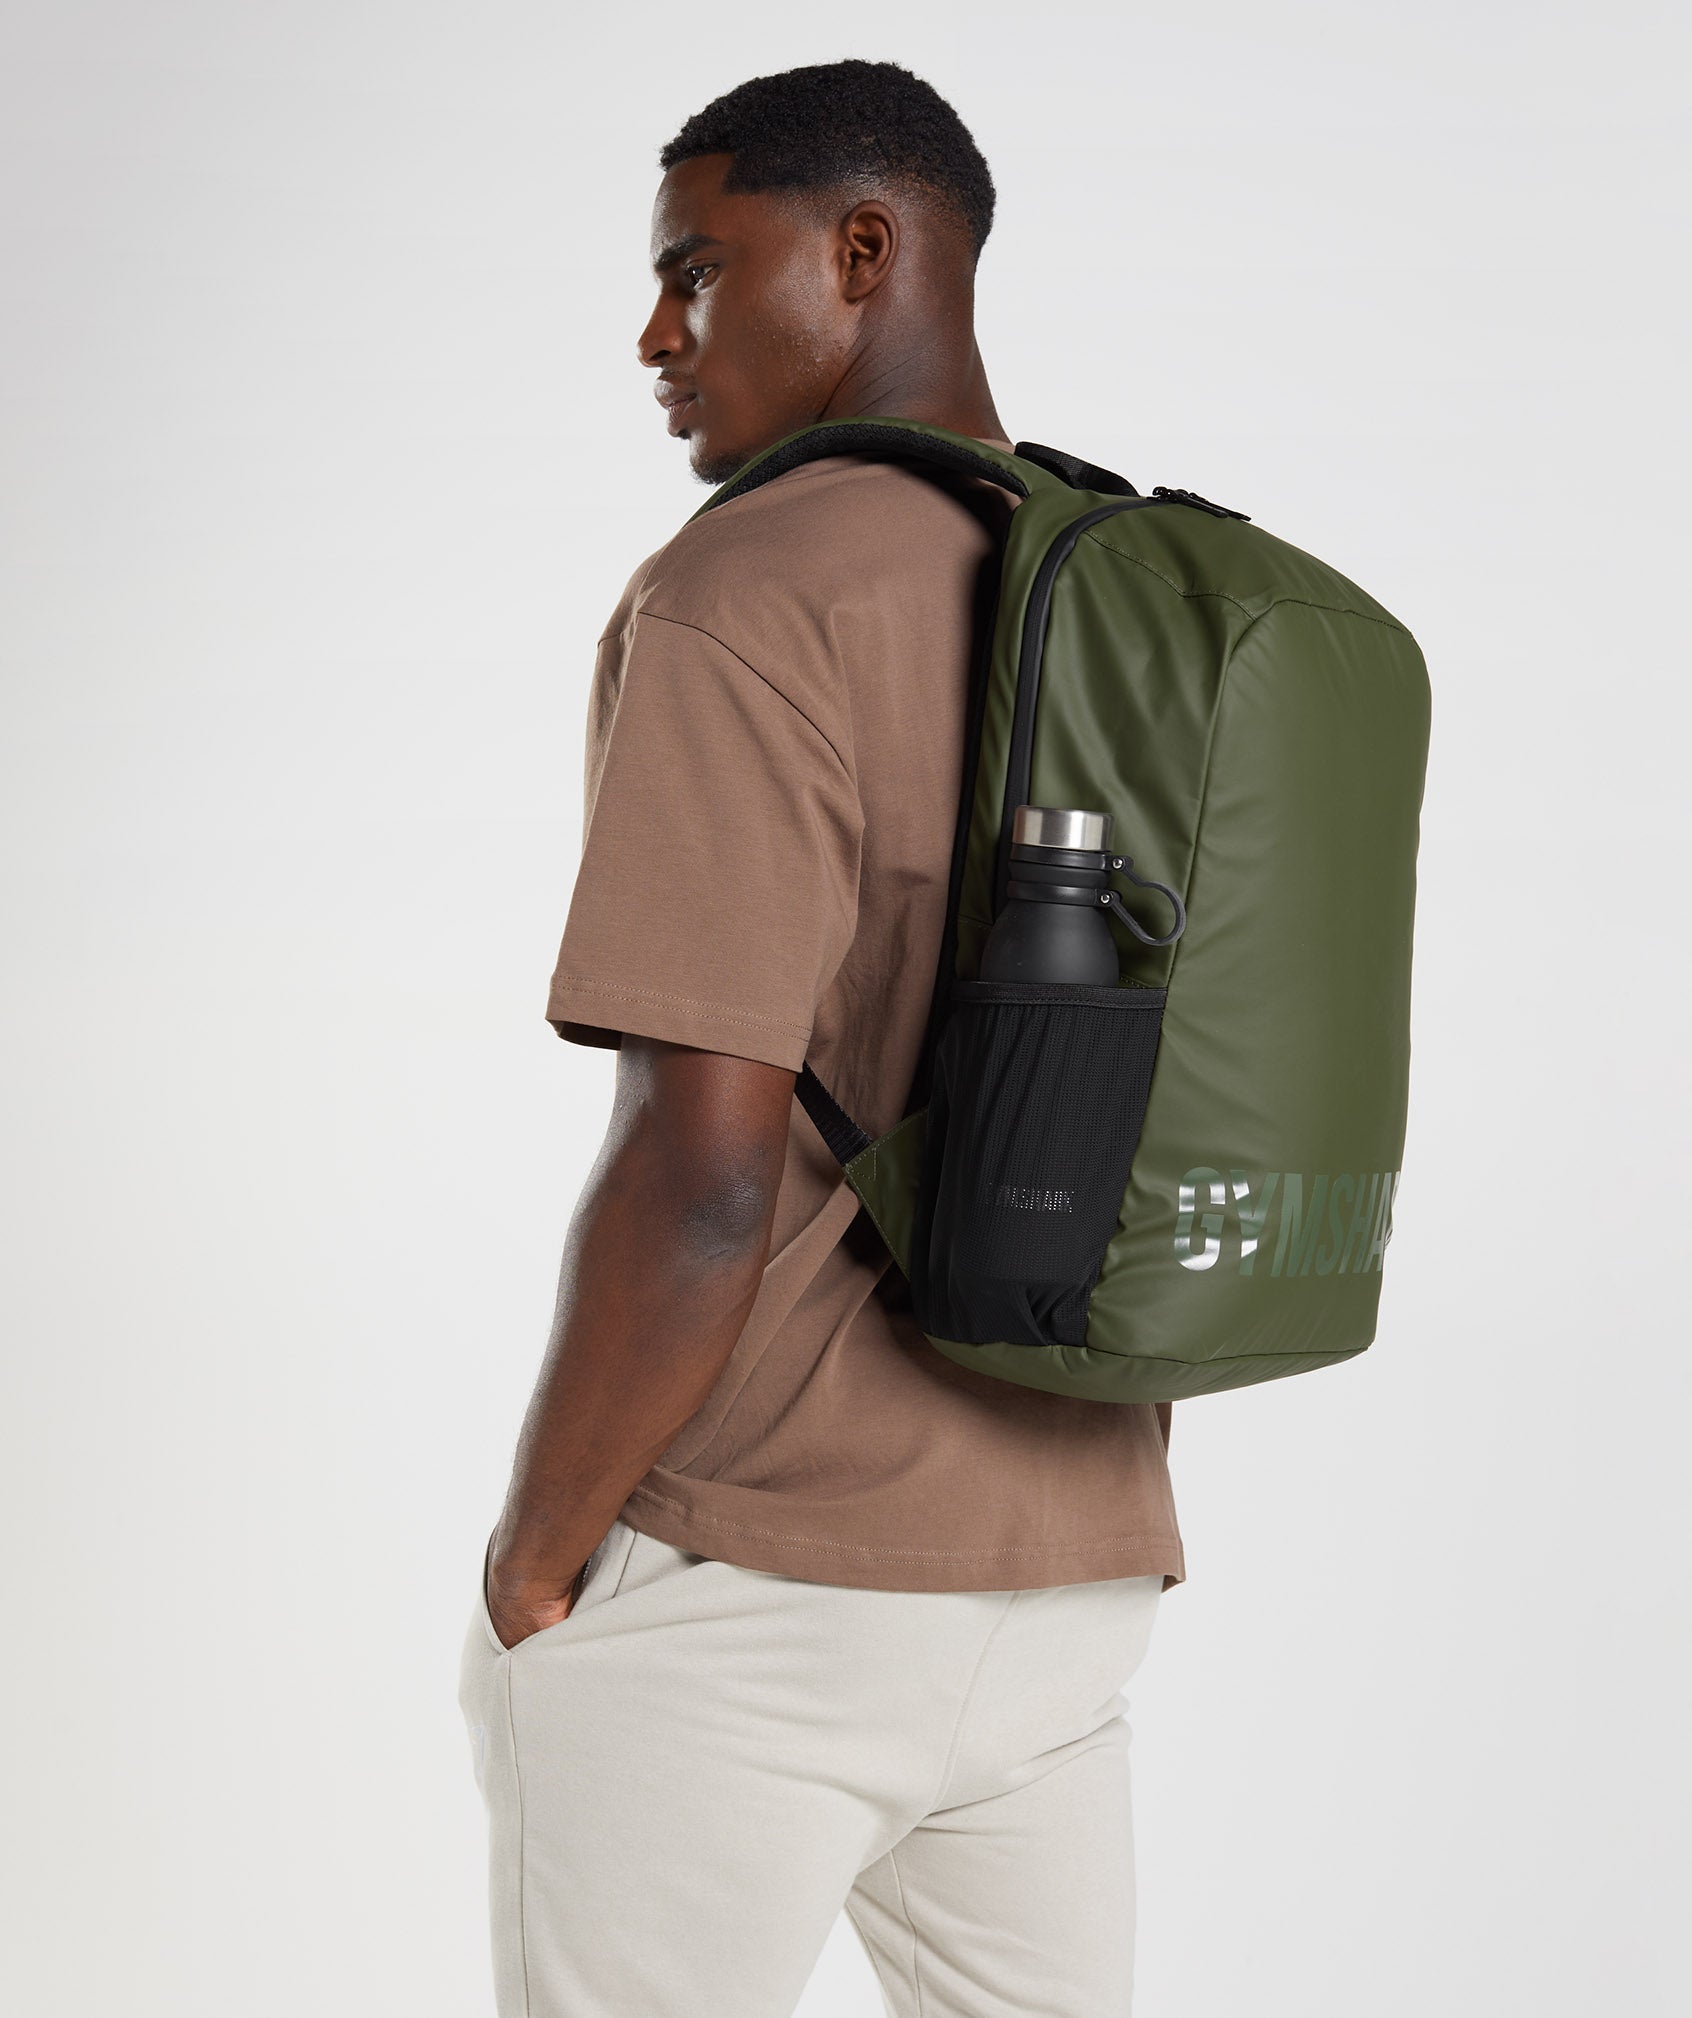 X-Series Bag 0.1 in Core Olive